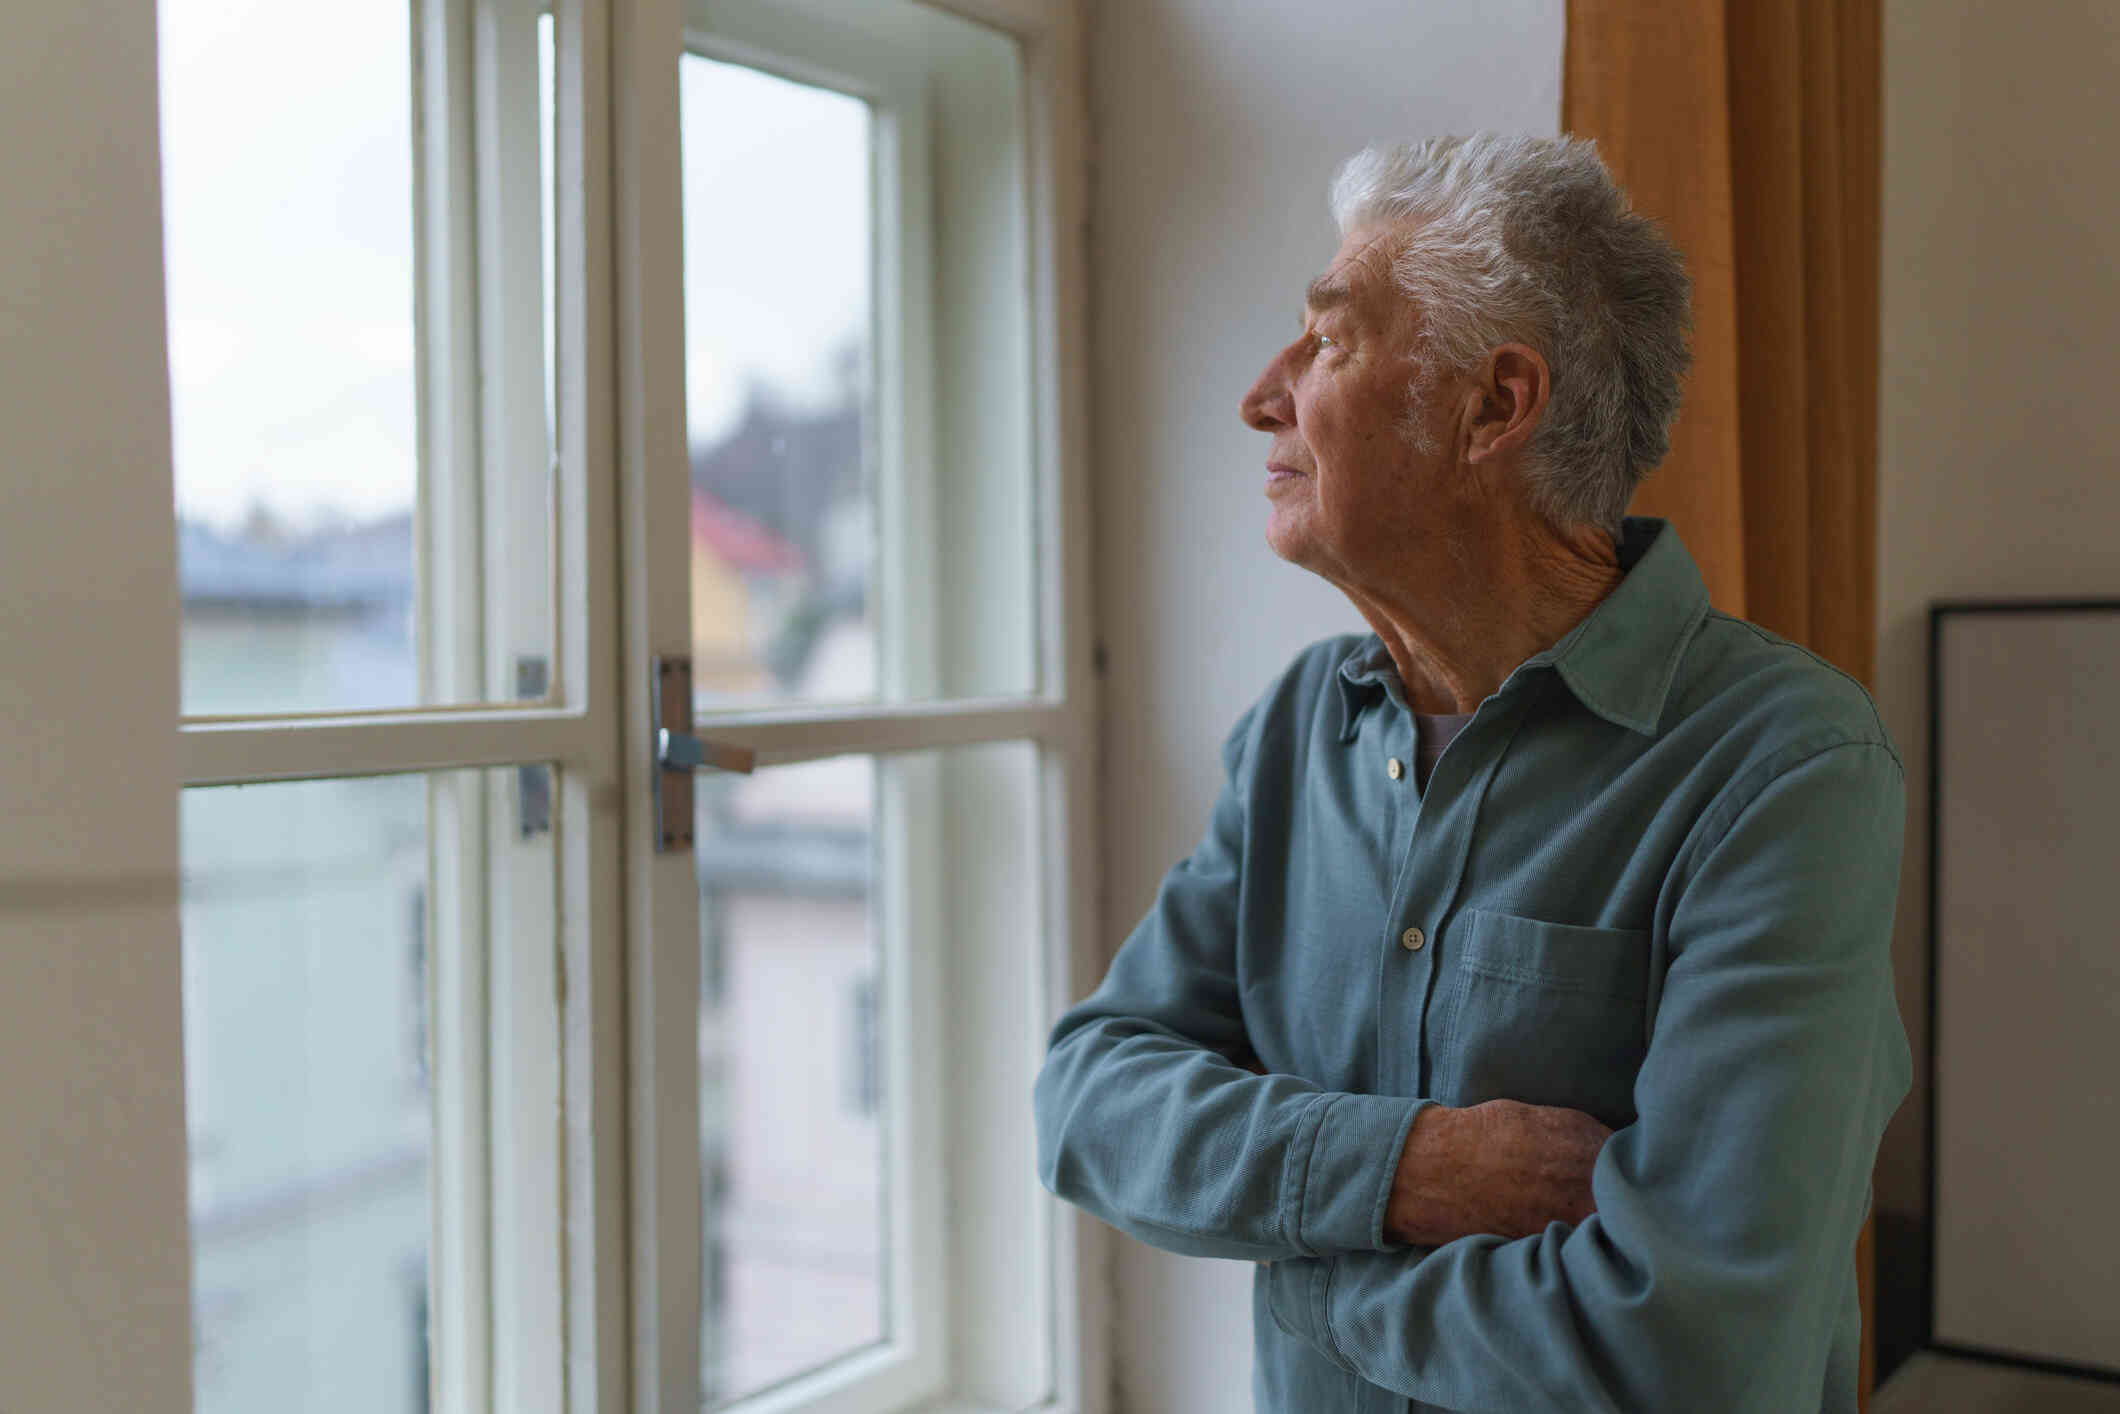 An elderly man in a button down shirt stands infront of a window of his home and crosses his arms across his chest while gazing out of the window sadly.